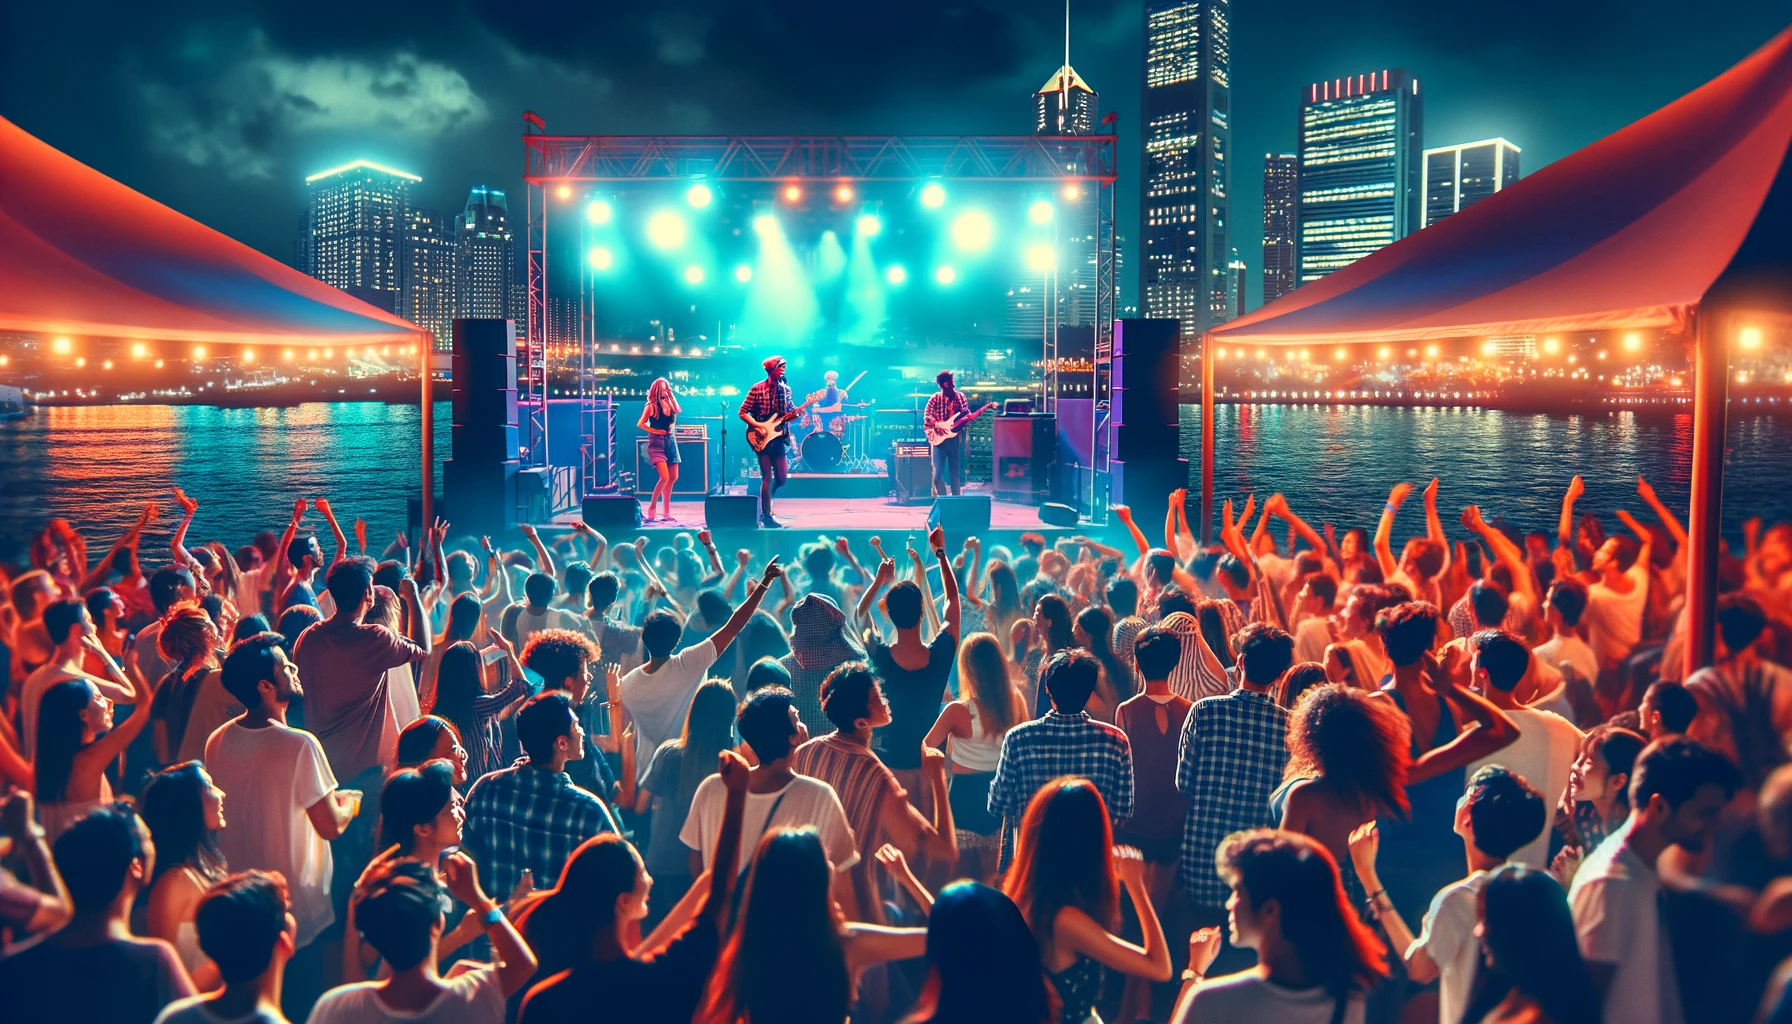 A lively scene of people dancing and having fun at a concert by the waterfront. The crowd is diverse, enjoying the music under colorful lights